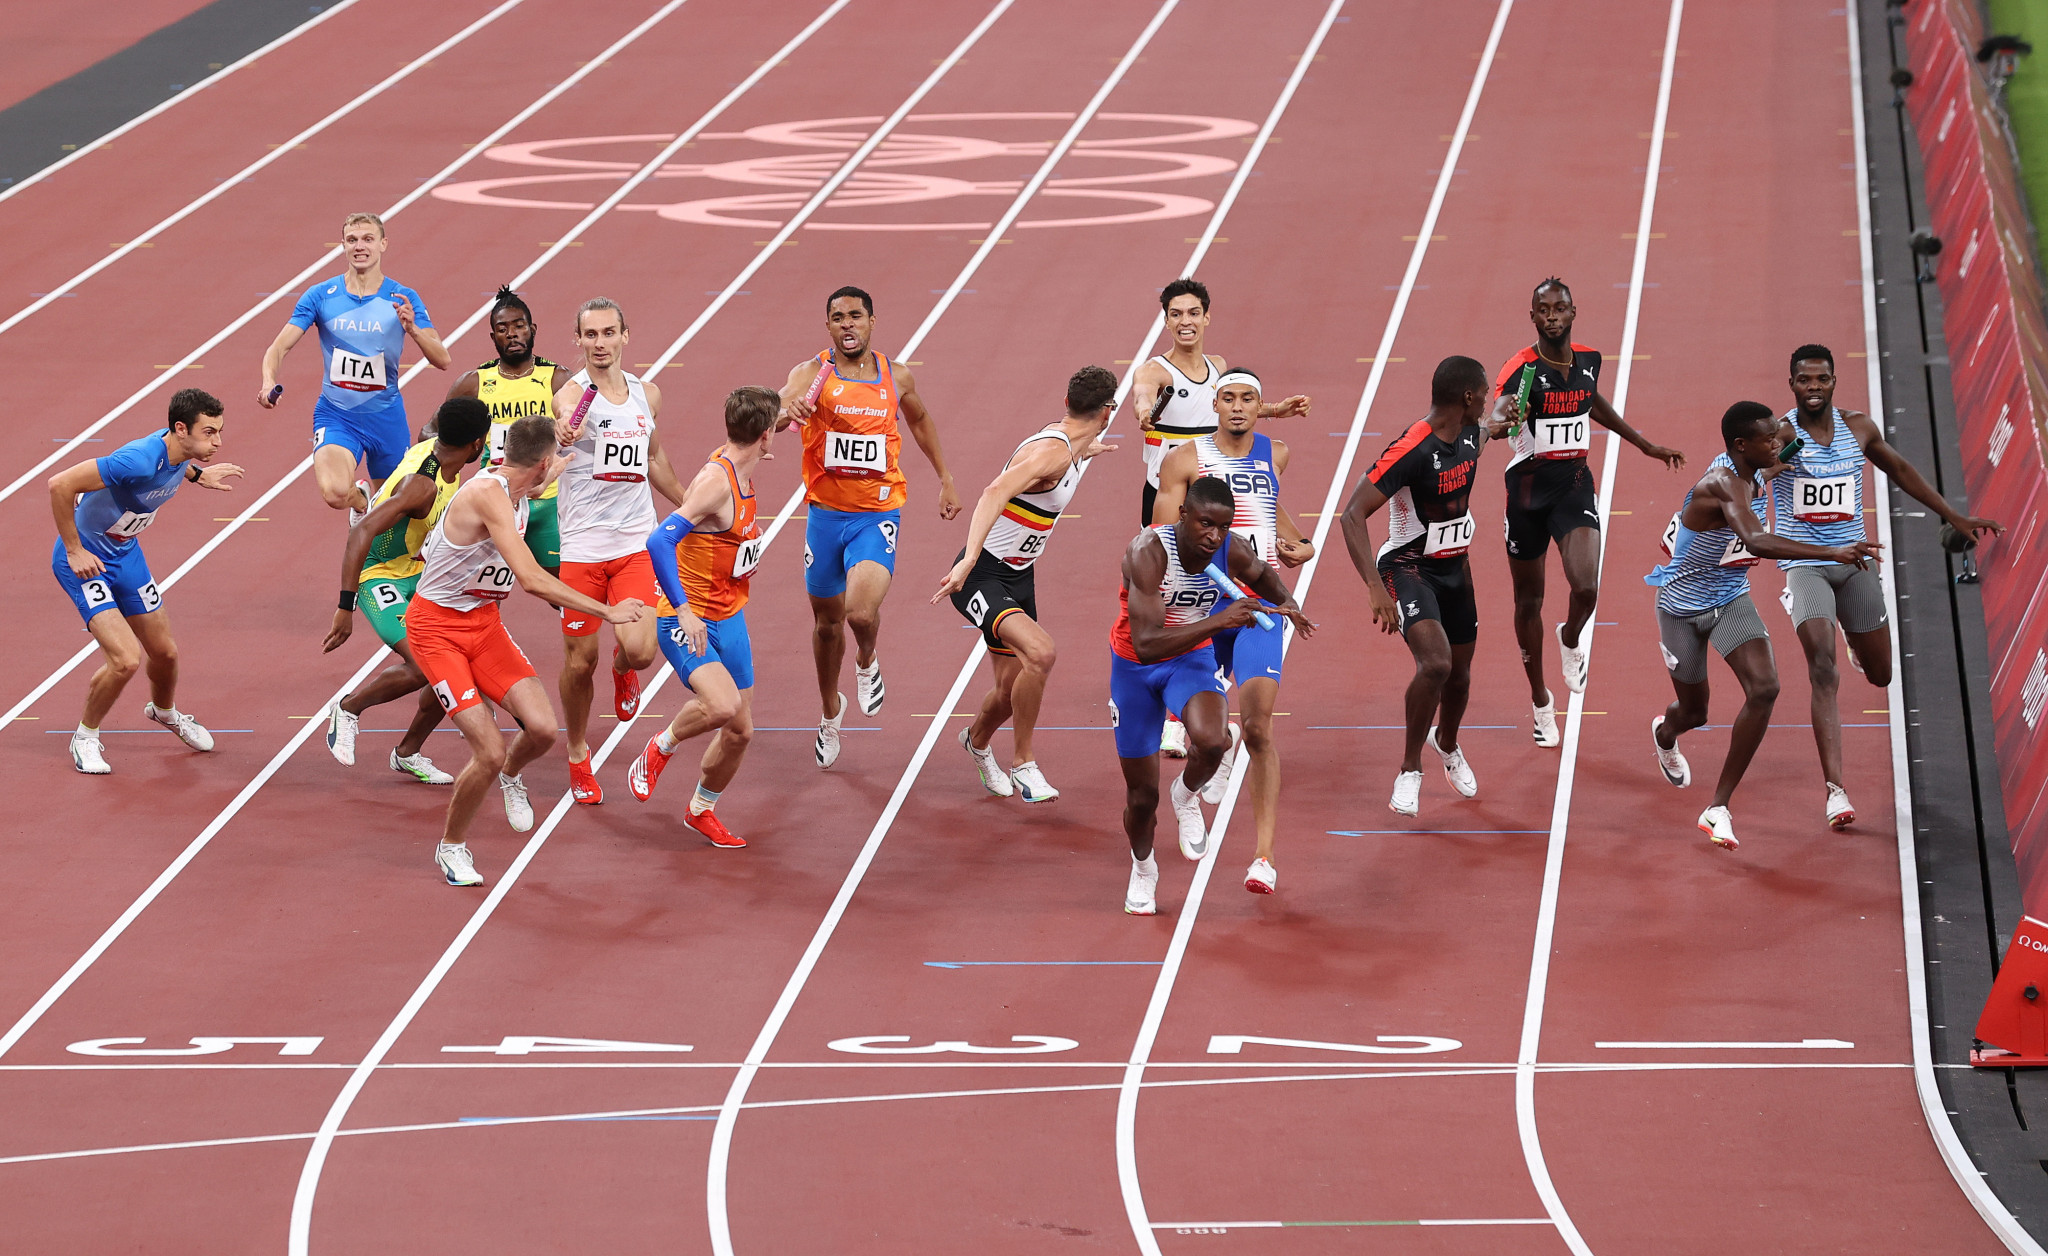 The athletics track programme concluded with the 4x400 metres relays, which were both won by the United States ©Getty Images